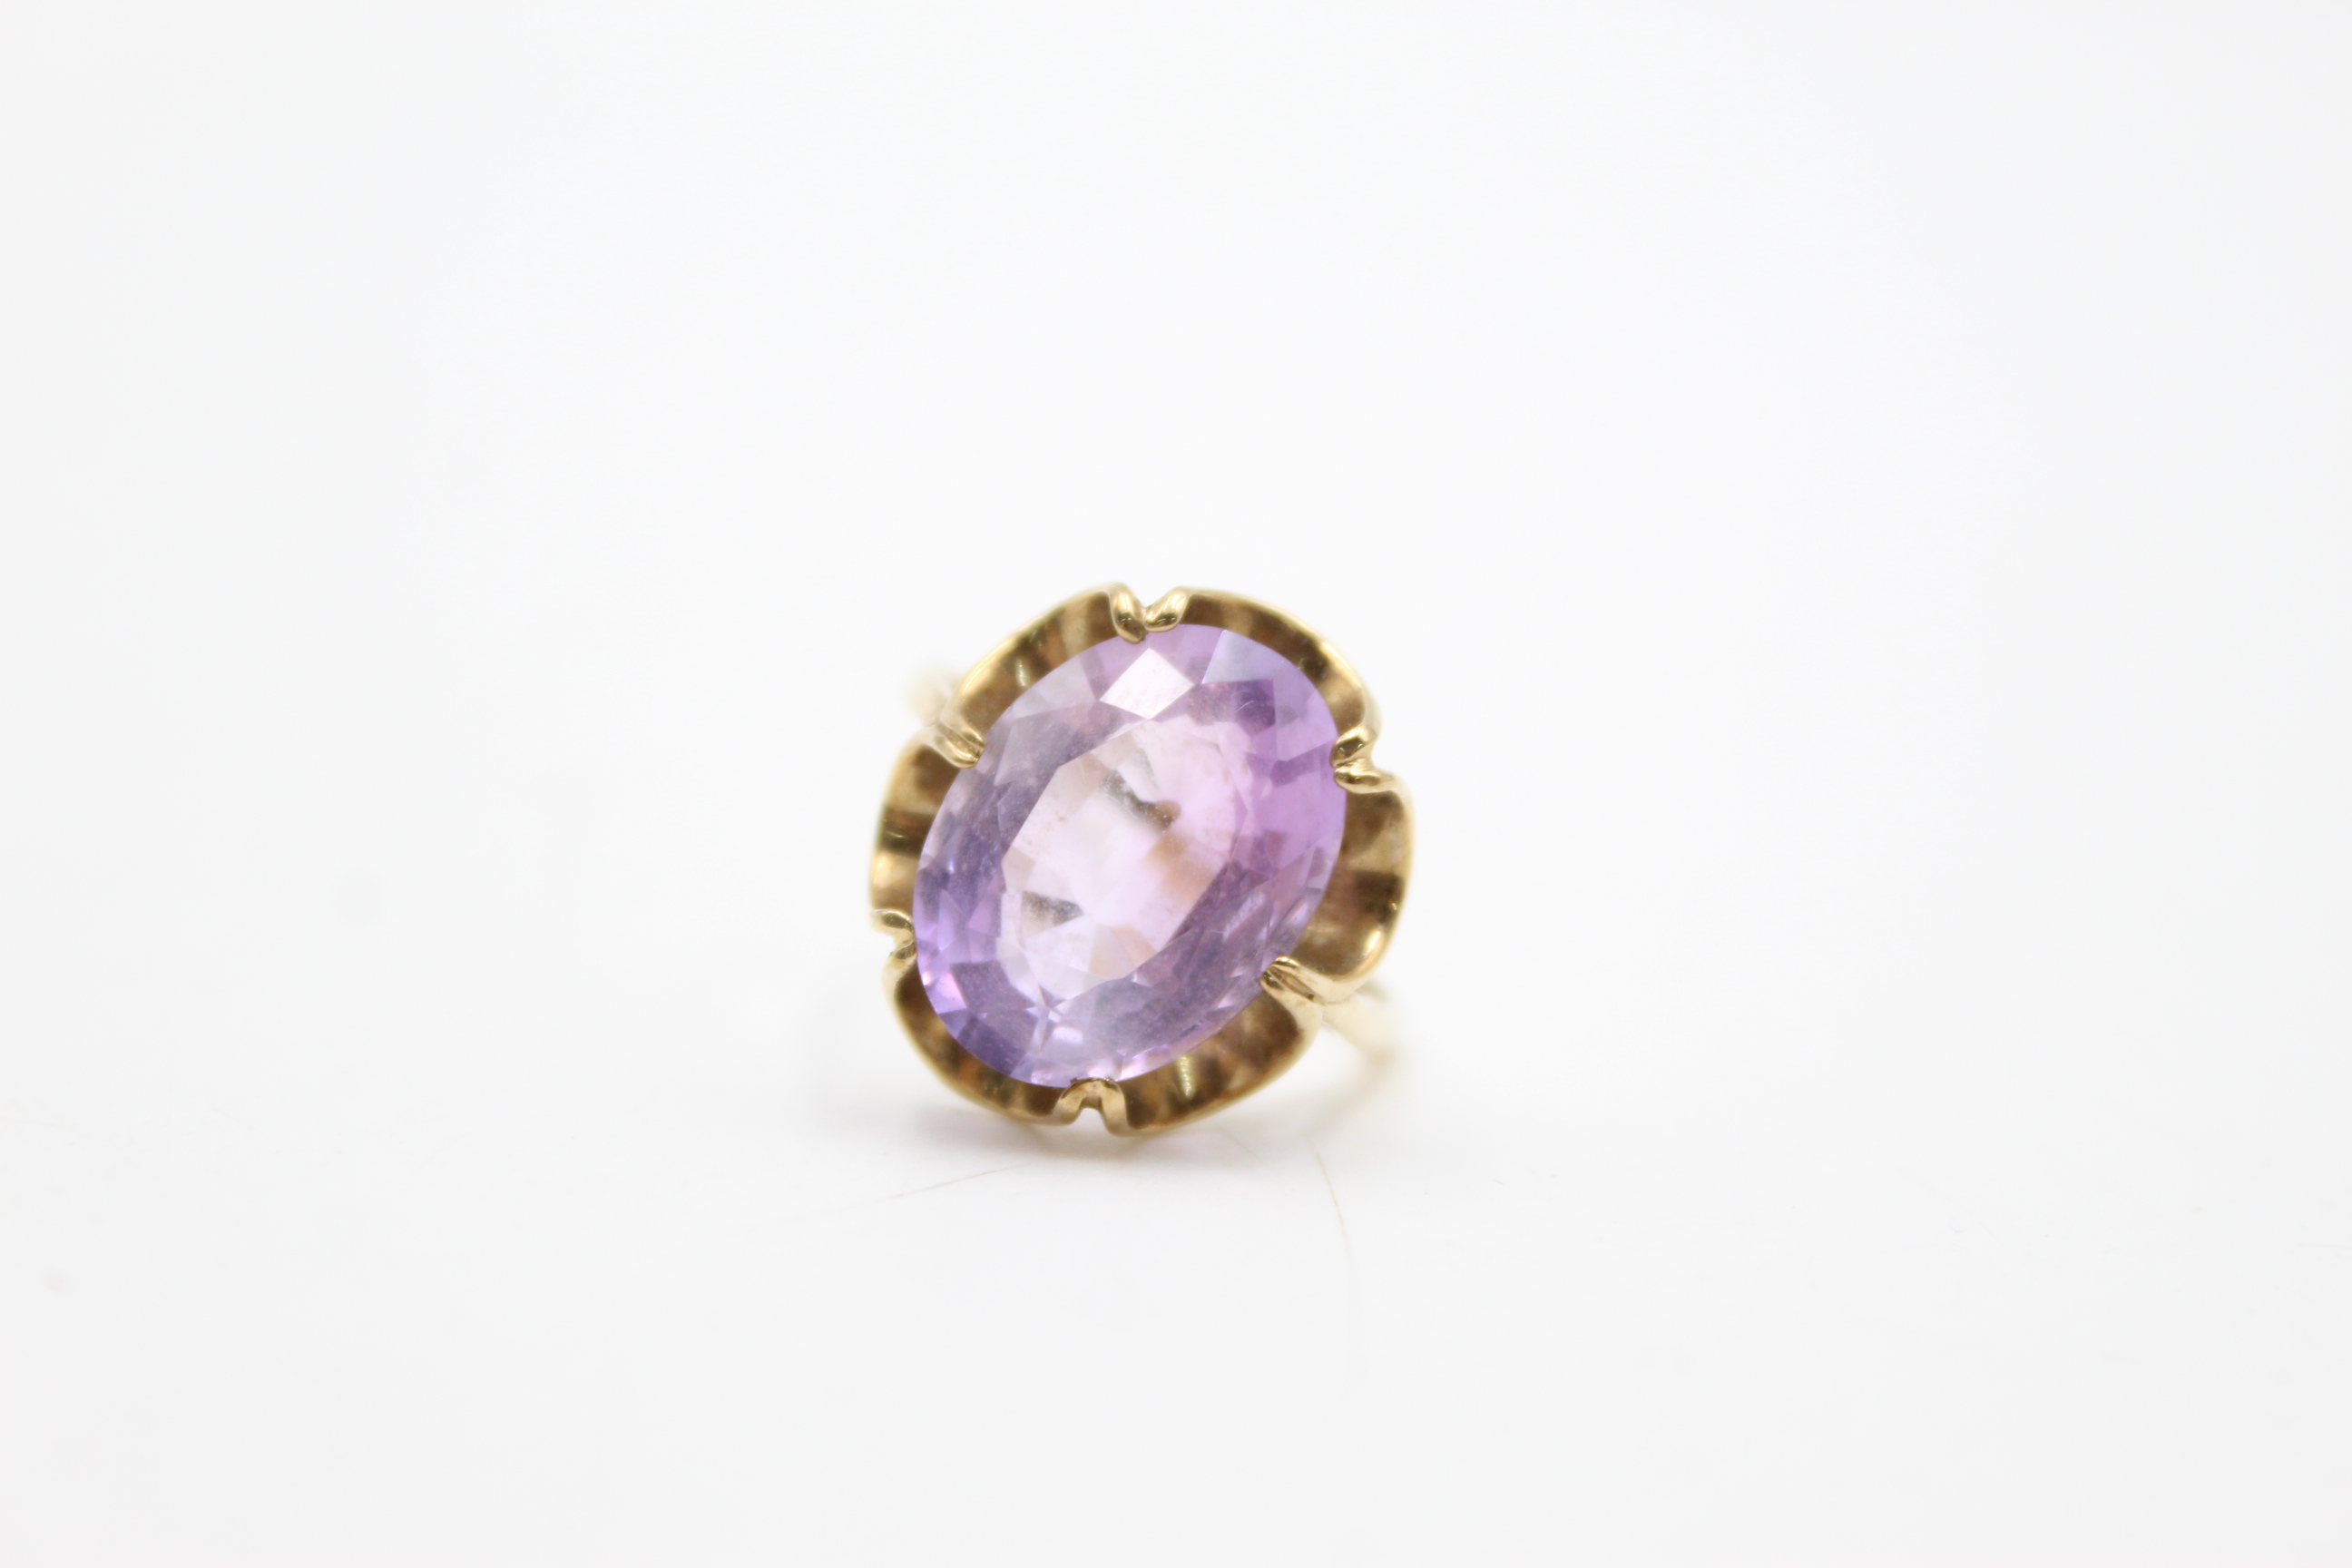 9ct gold amethyst dress ring (5.1g) - Image 2 of 7